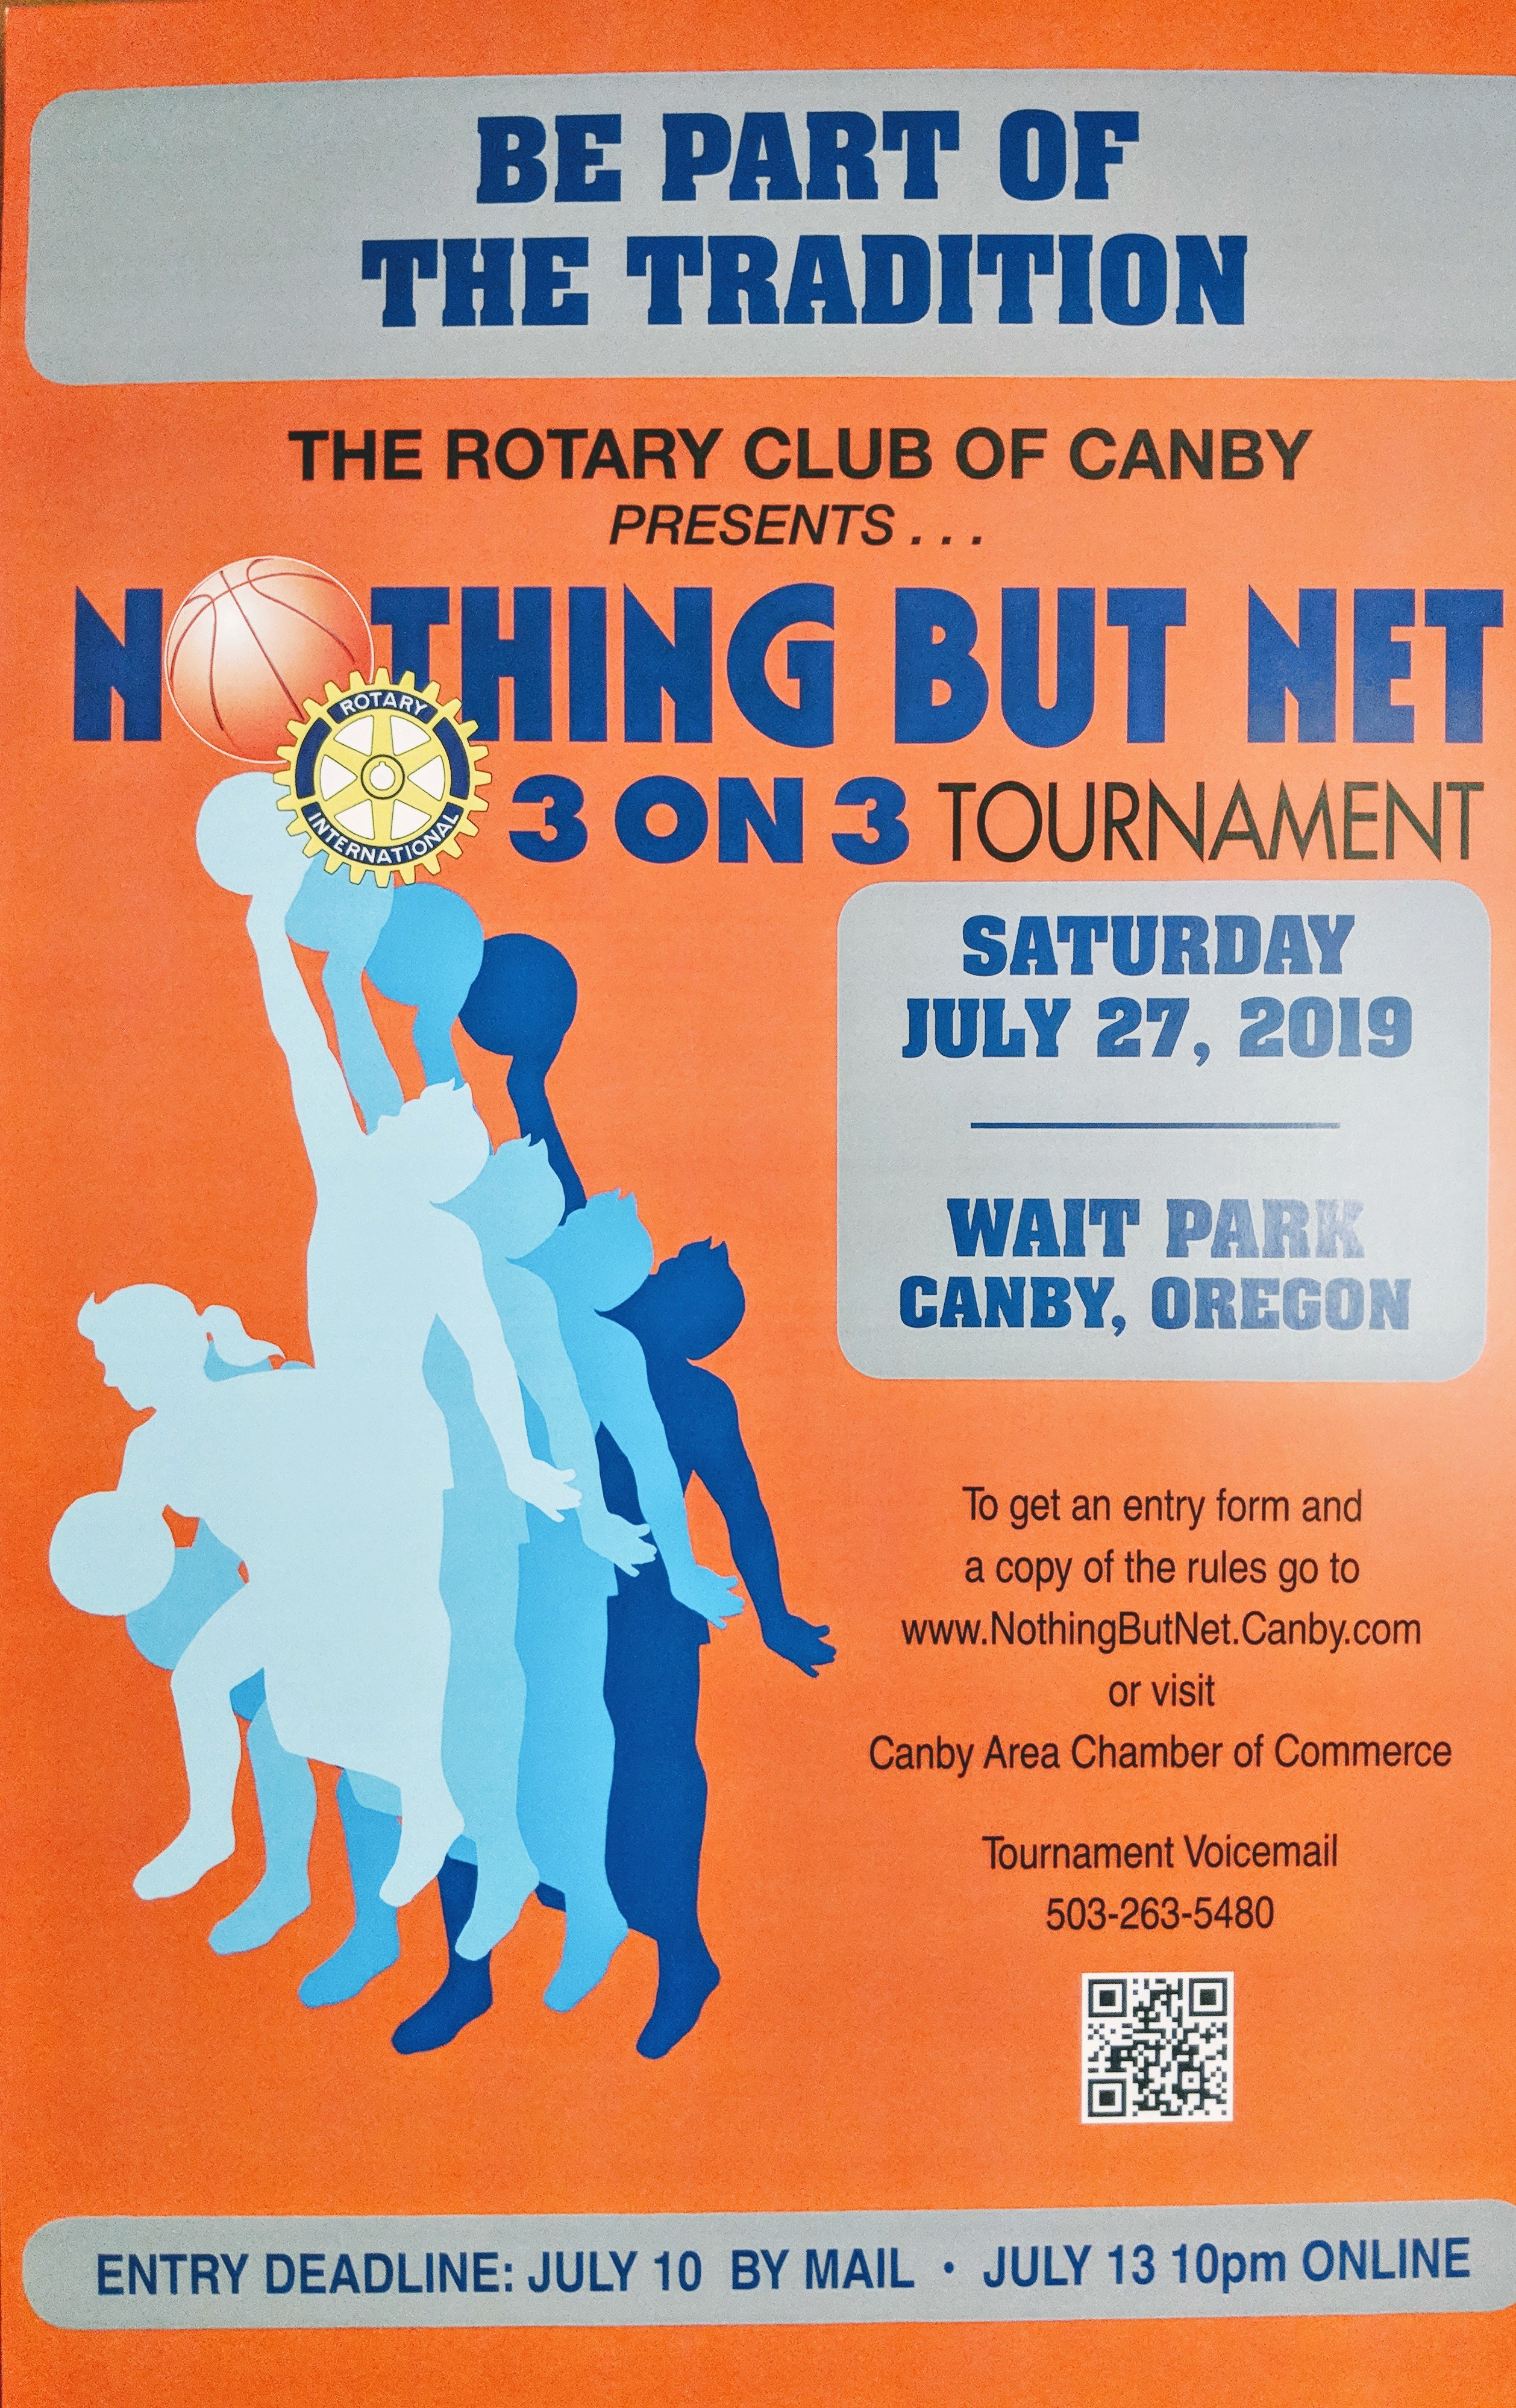 Canby Rotary 3-on-3 Basketball Tournament